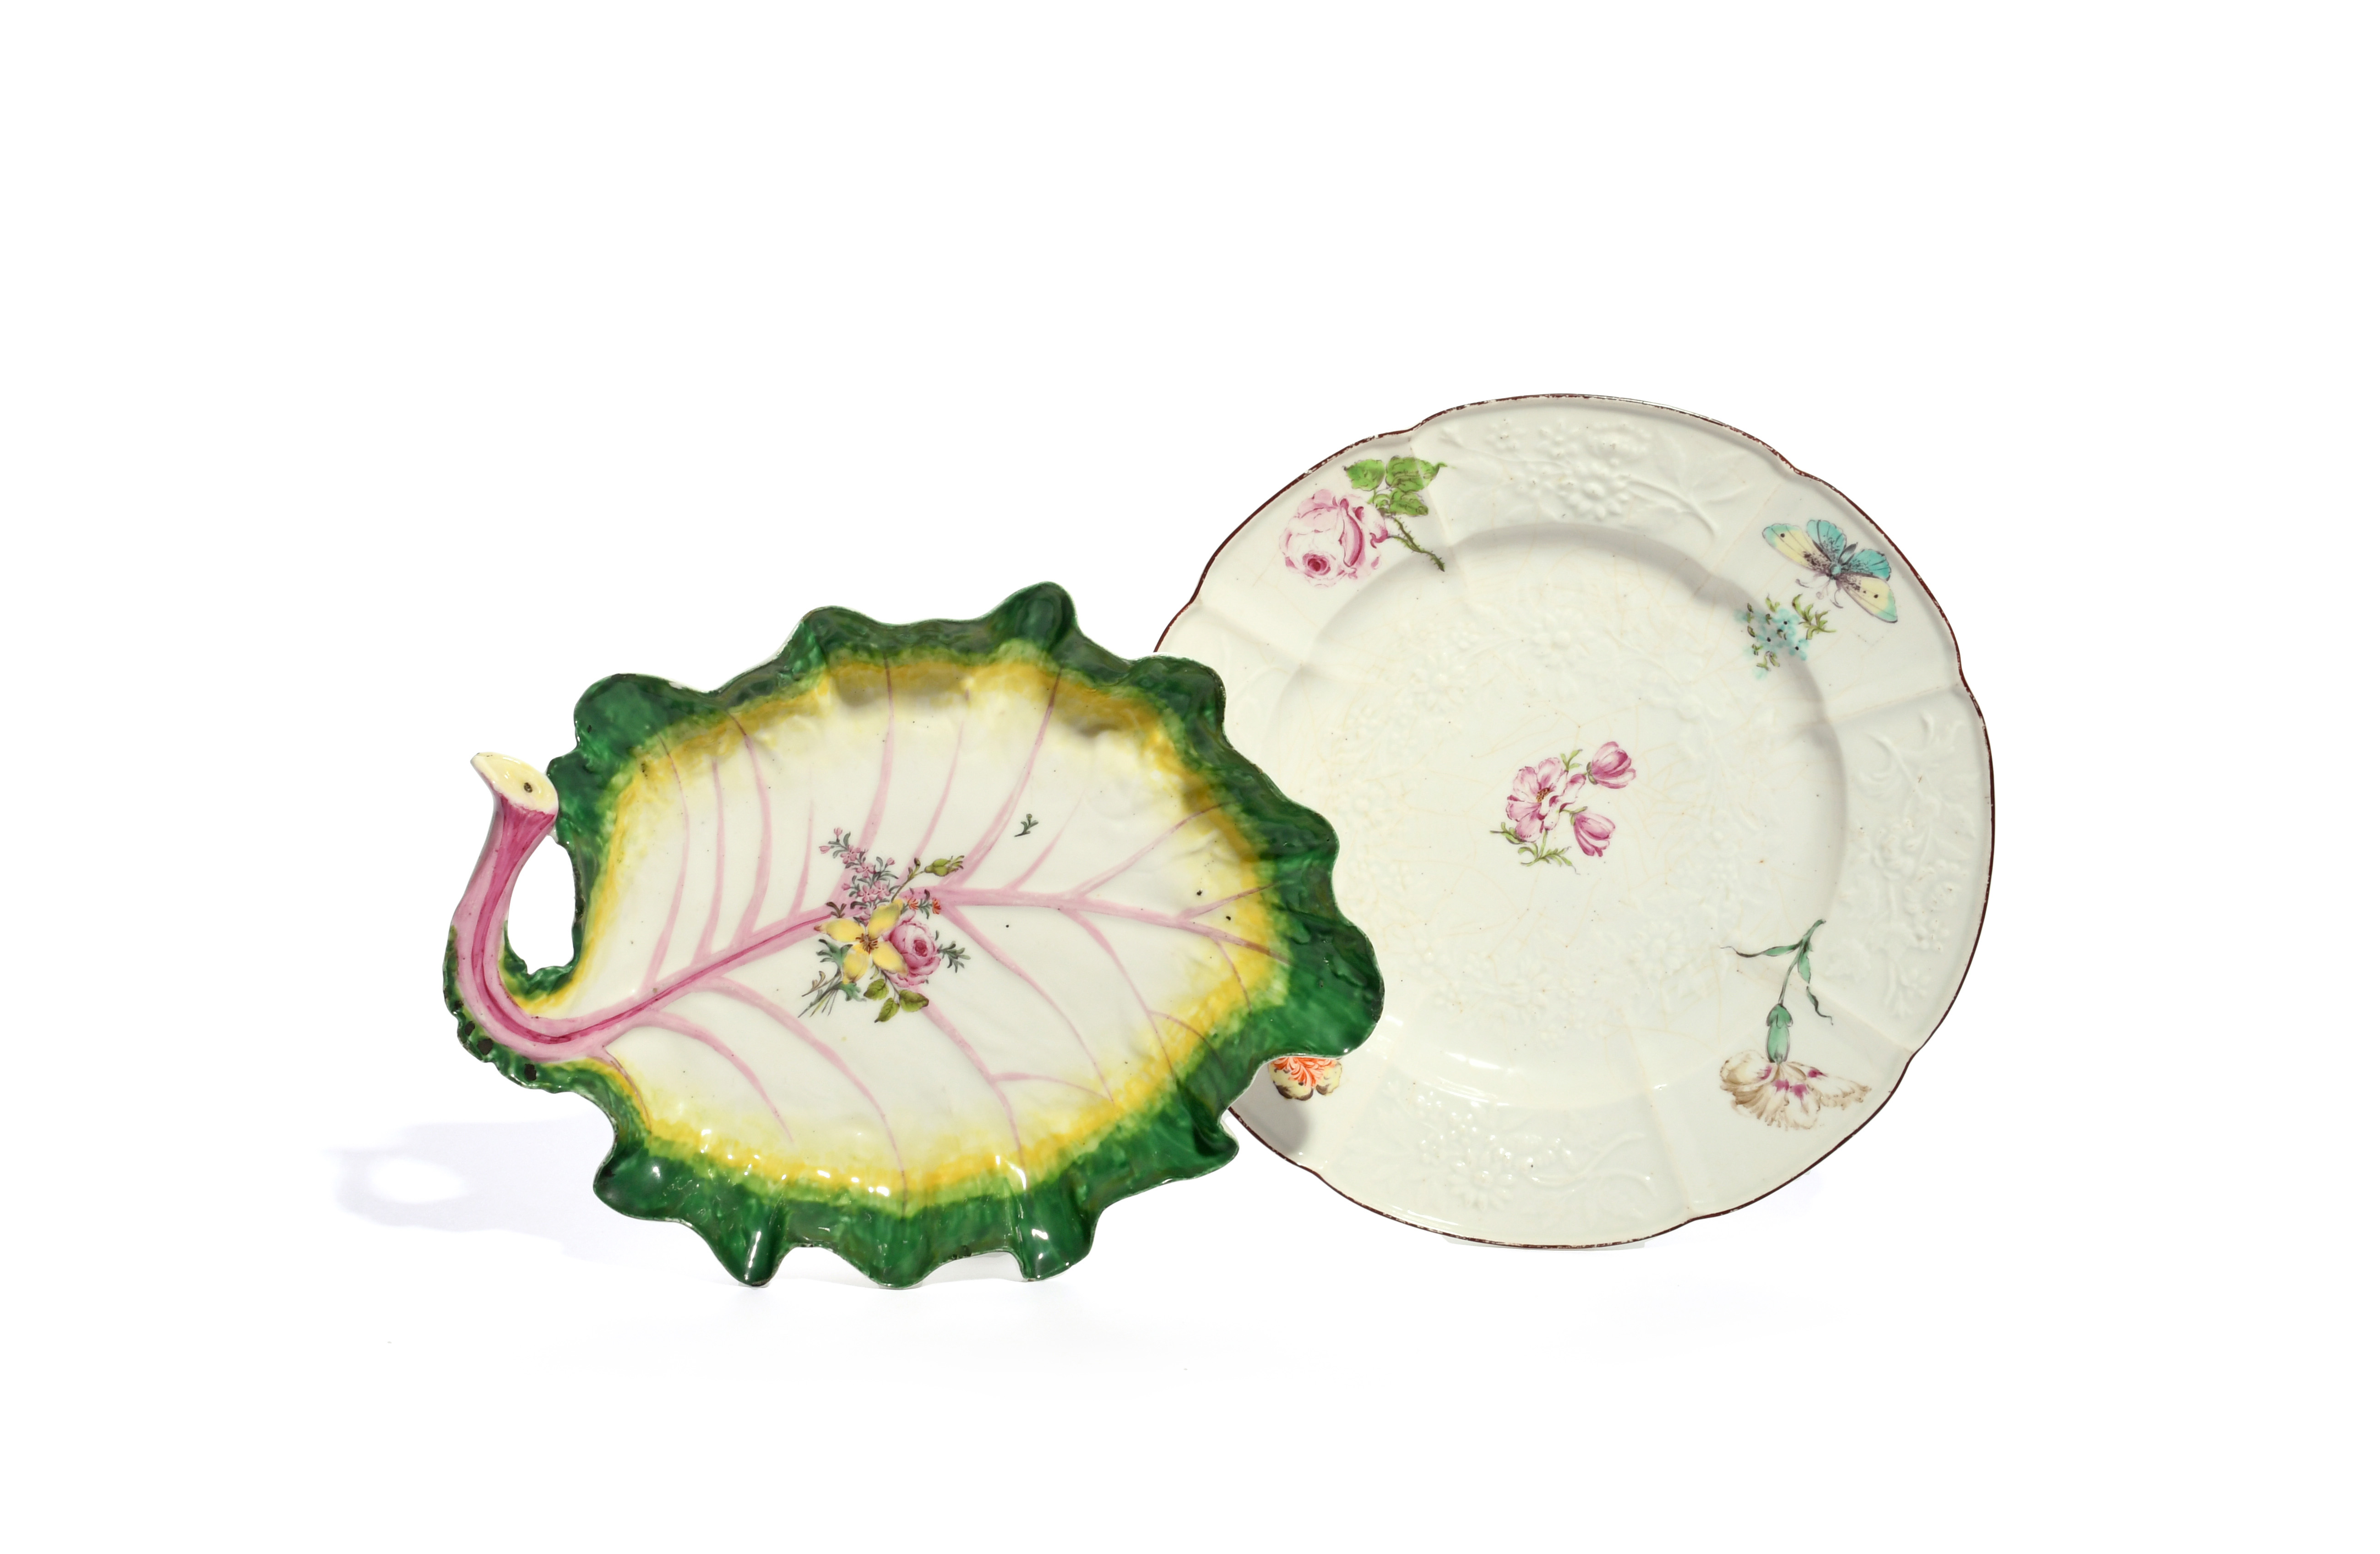 Two Chelsea dishes c.1755-58, one moulded in the Meissen Gotzkowsky manner with a central garland of - Image 2 of 2